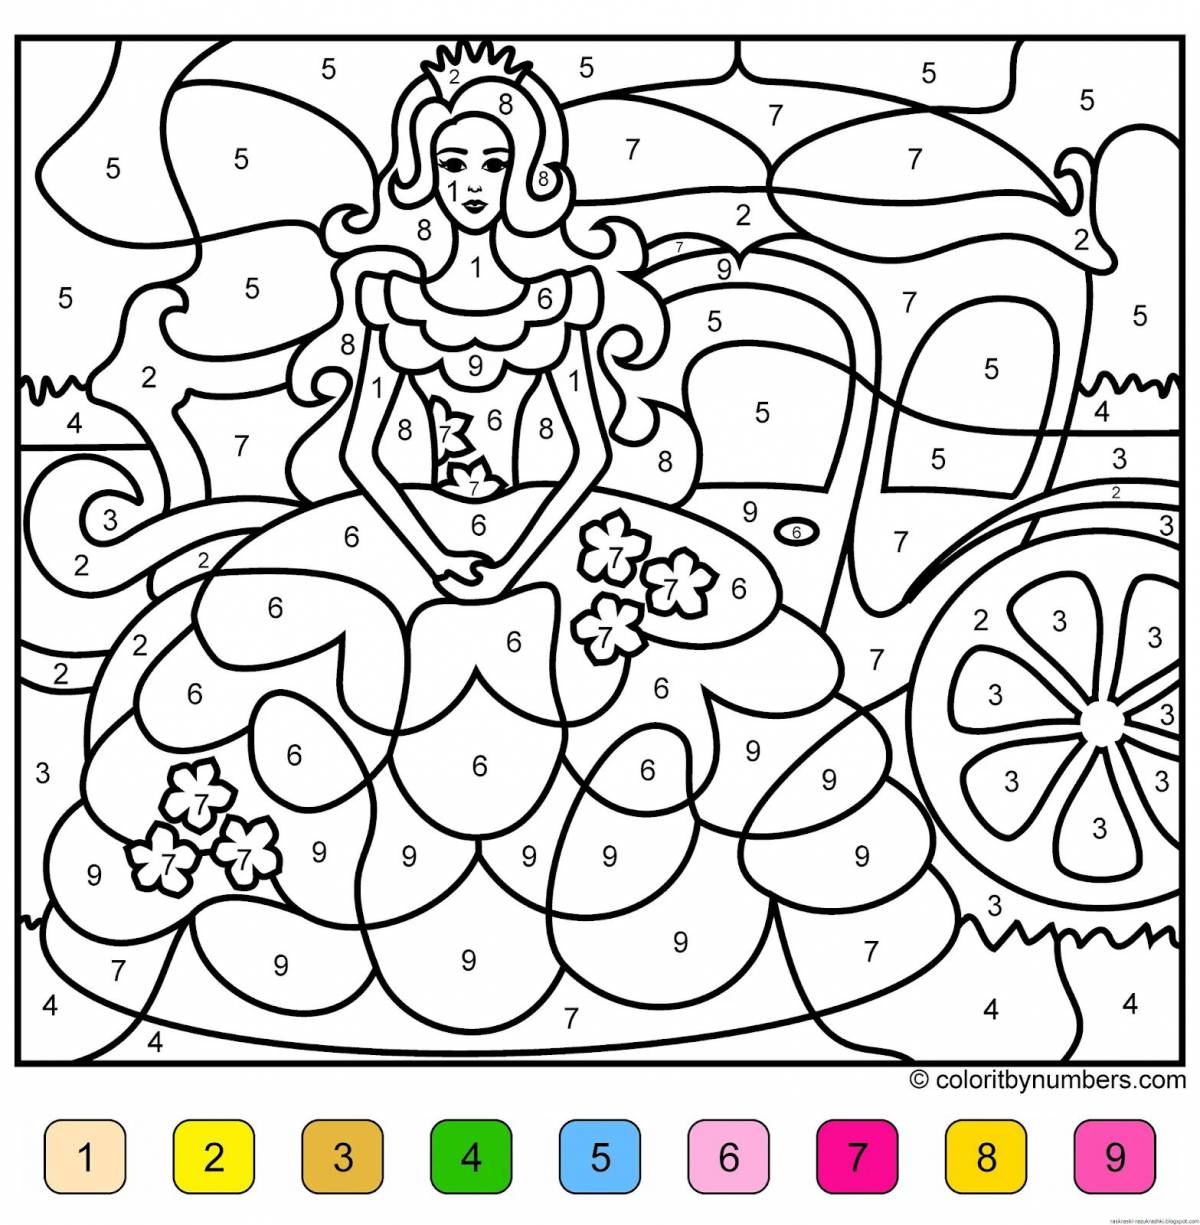 Coloring book for girls 7 years old